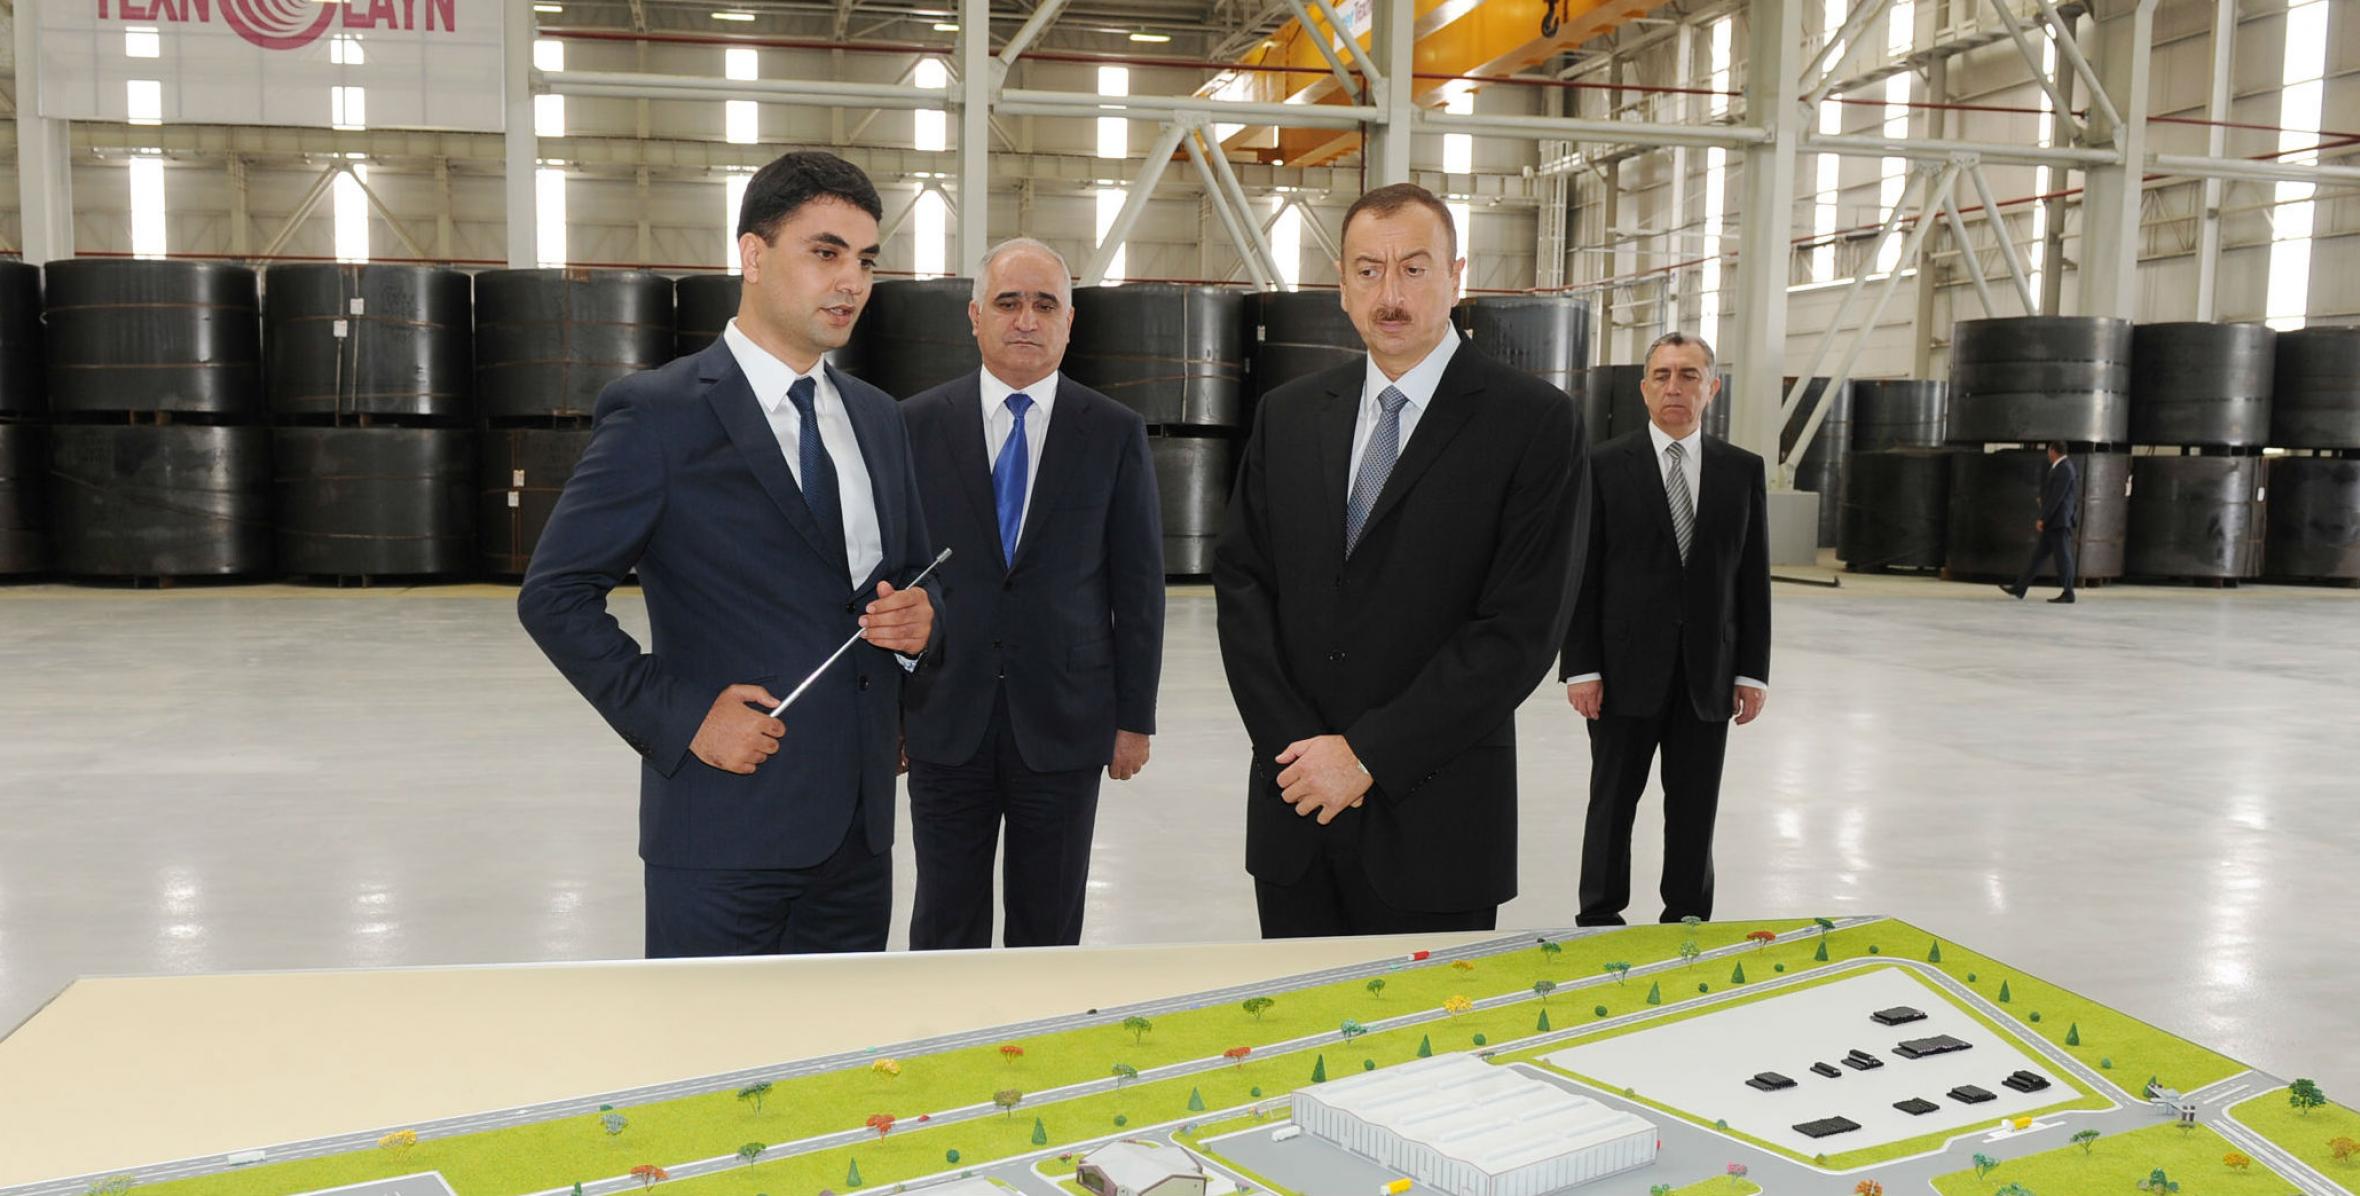 Ilham Aliyev attended the opening of a plant for the production of steel pipes of the “Azertechnoline” Limited Liability Company